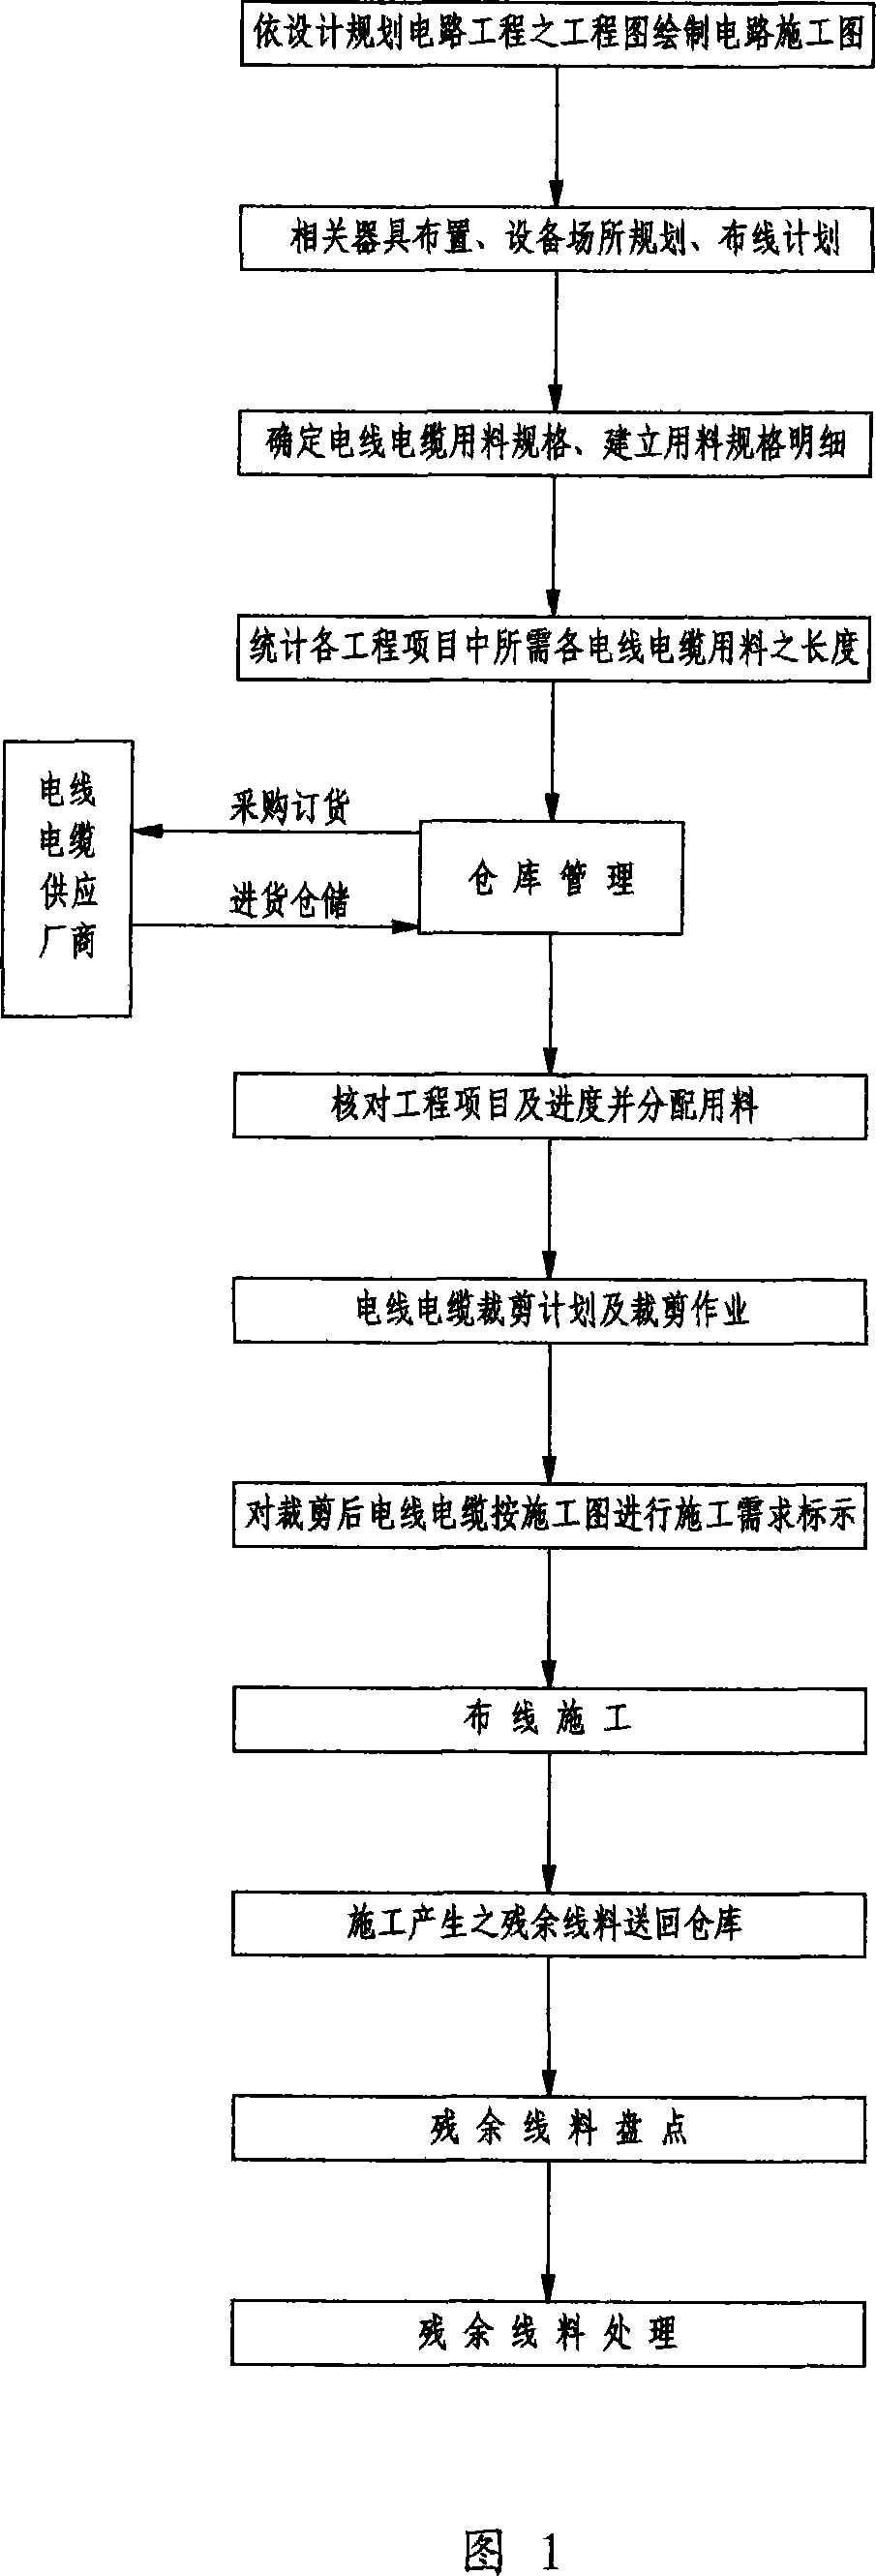 Method and special-purpose equipment for electric wire and cable increasing operation of clipping and signal